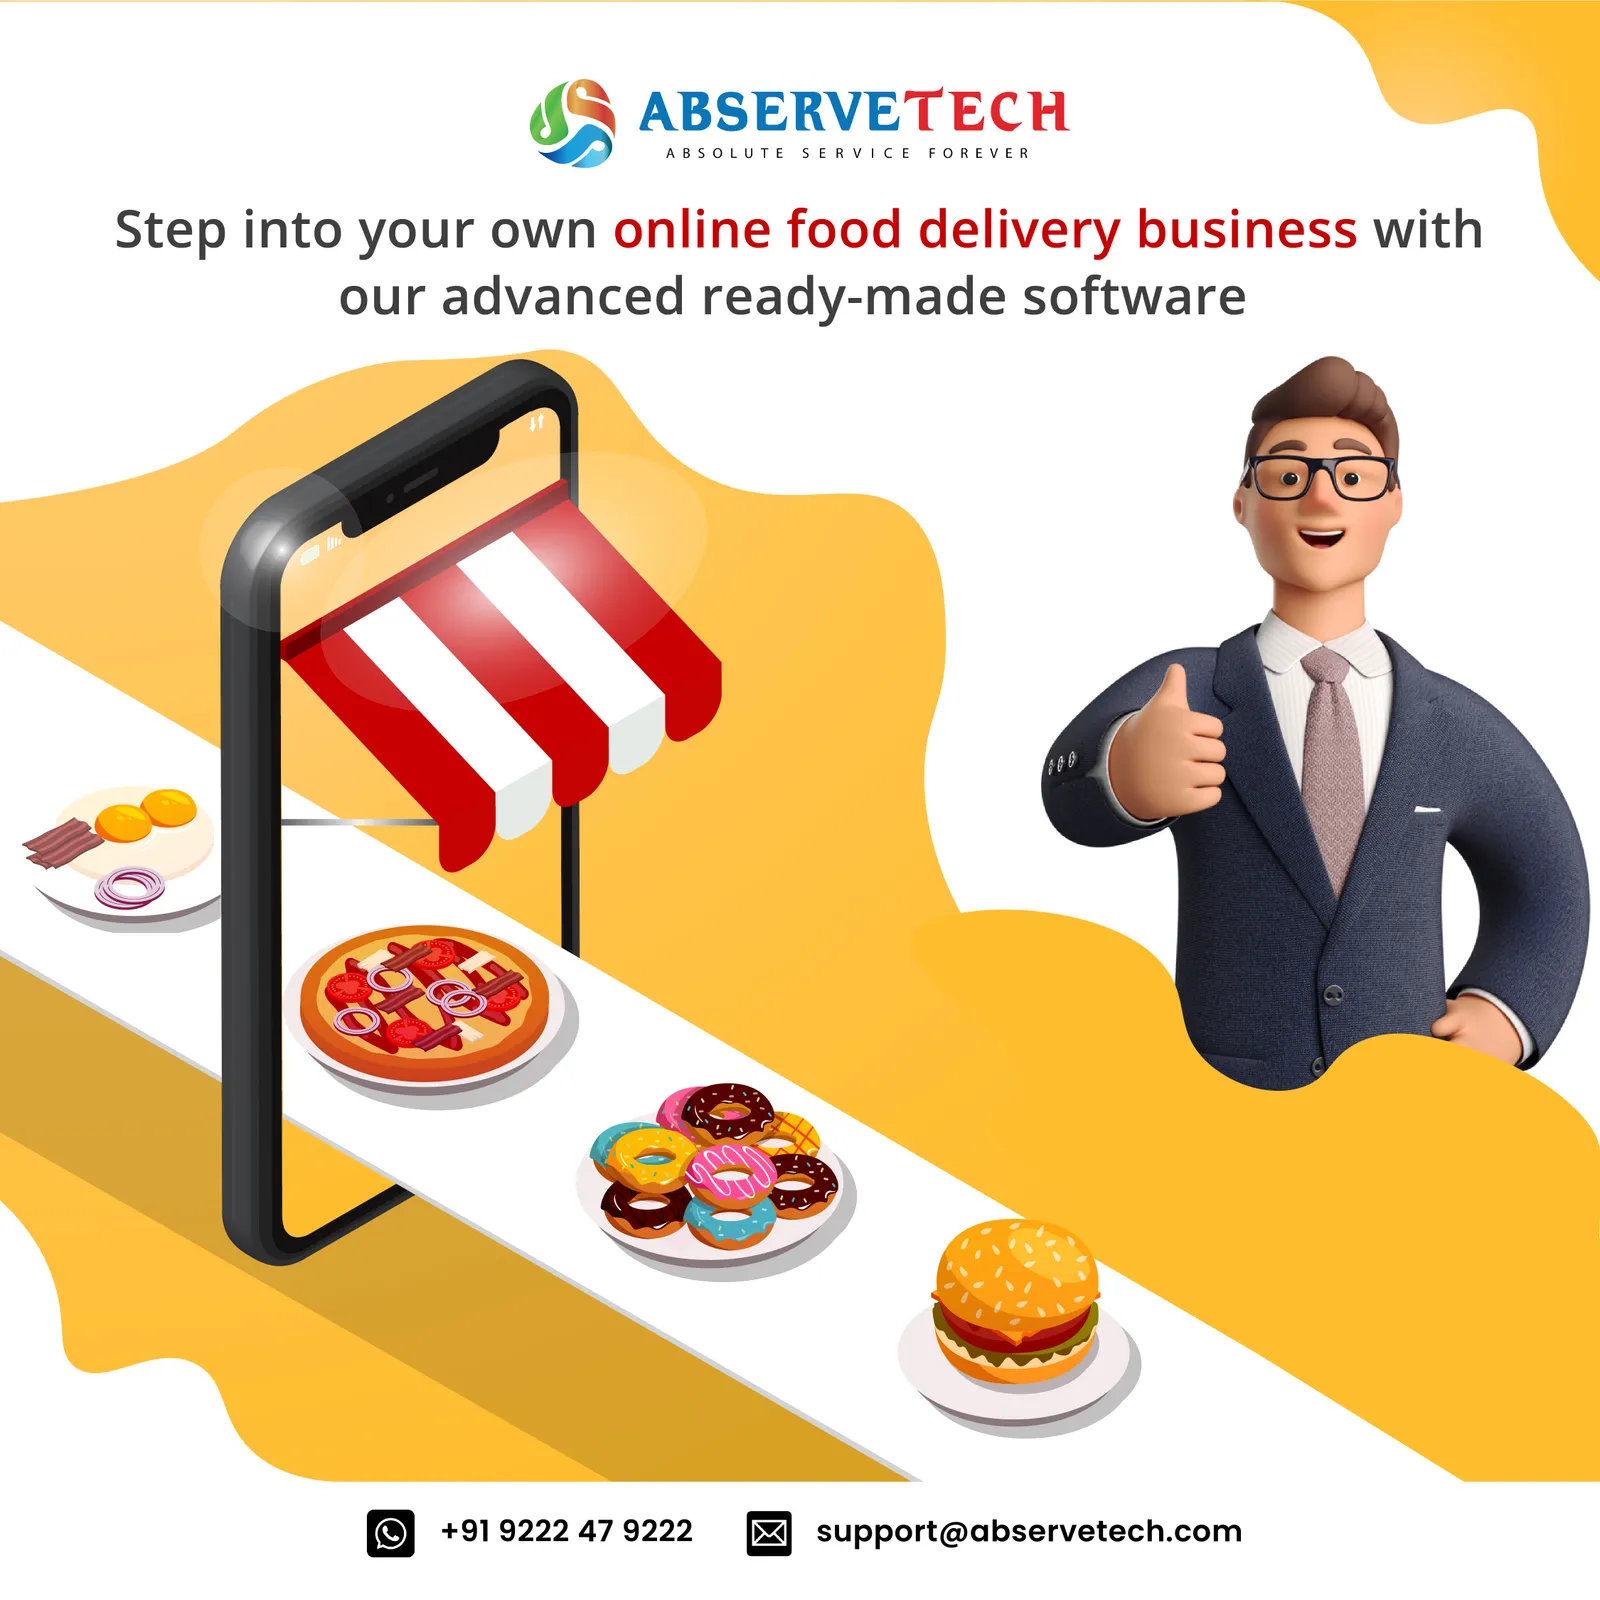 Step into your own online food delivery business with our software